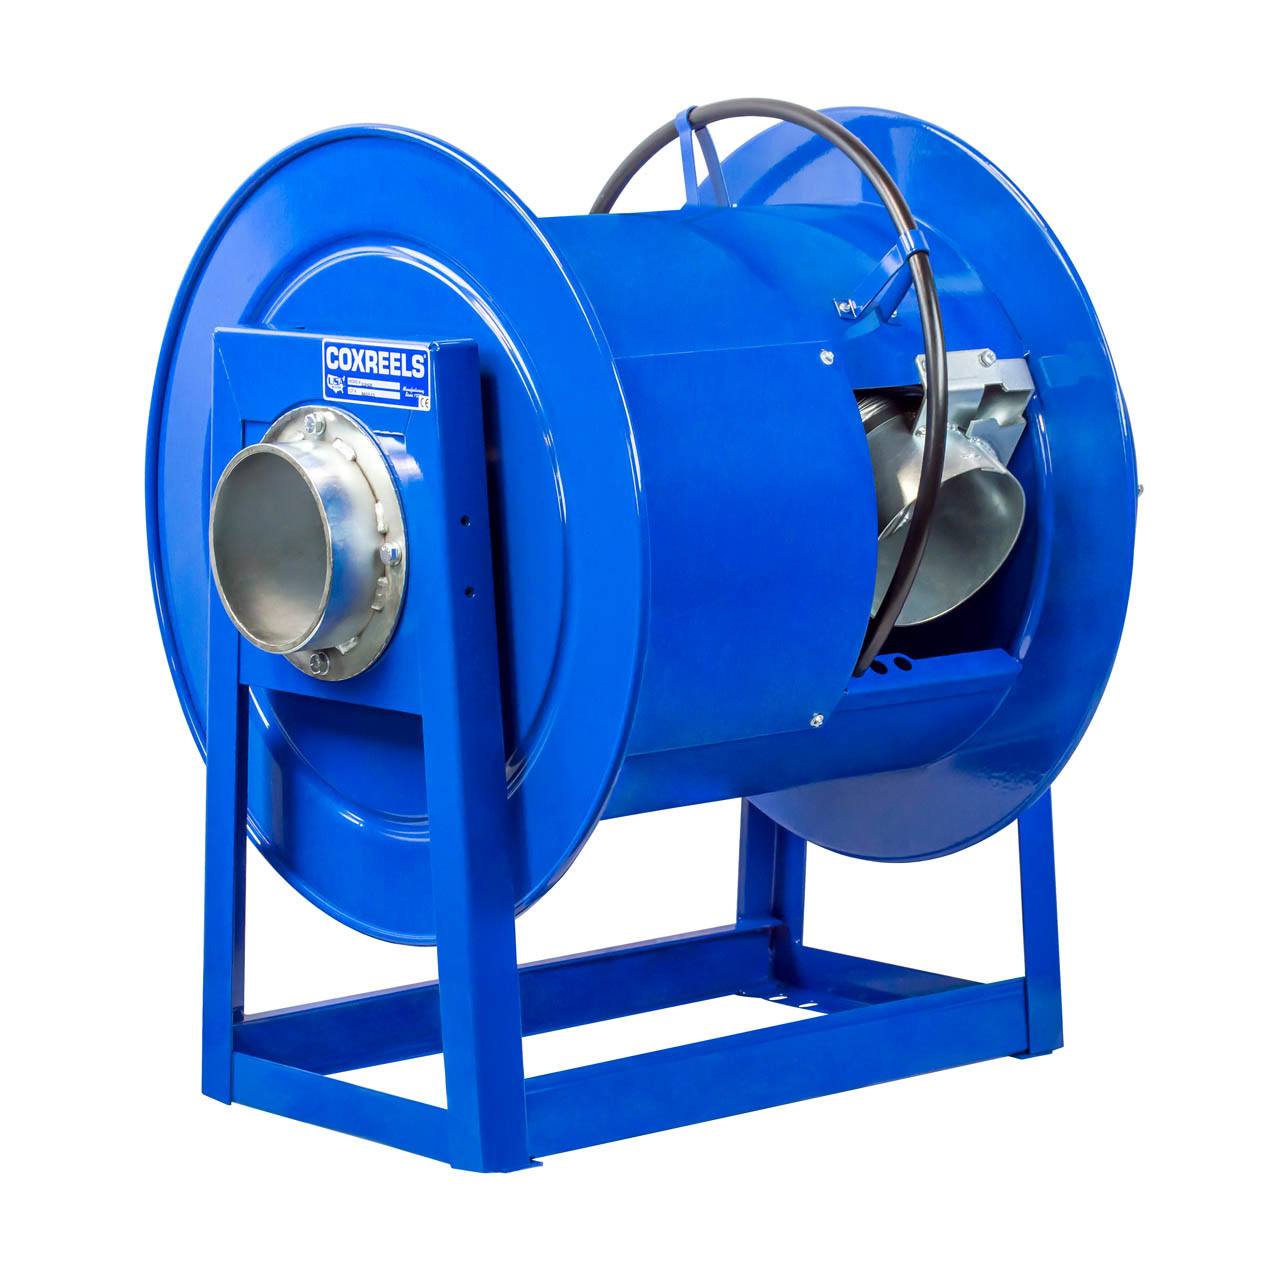 Coxreels 300 Series Spring Driven Exhaust Hose Reel - Reel Only - 4 in. x  24 ft. - John M. Ellsworth Co. Inc.